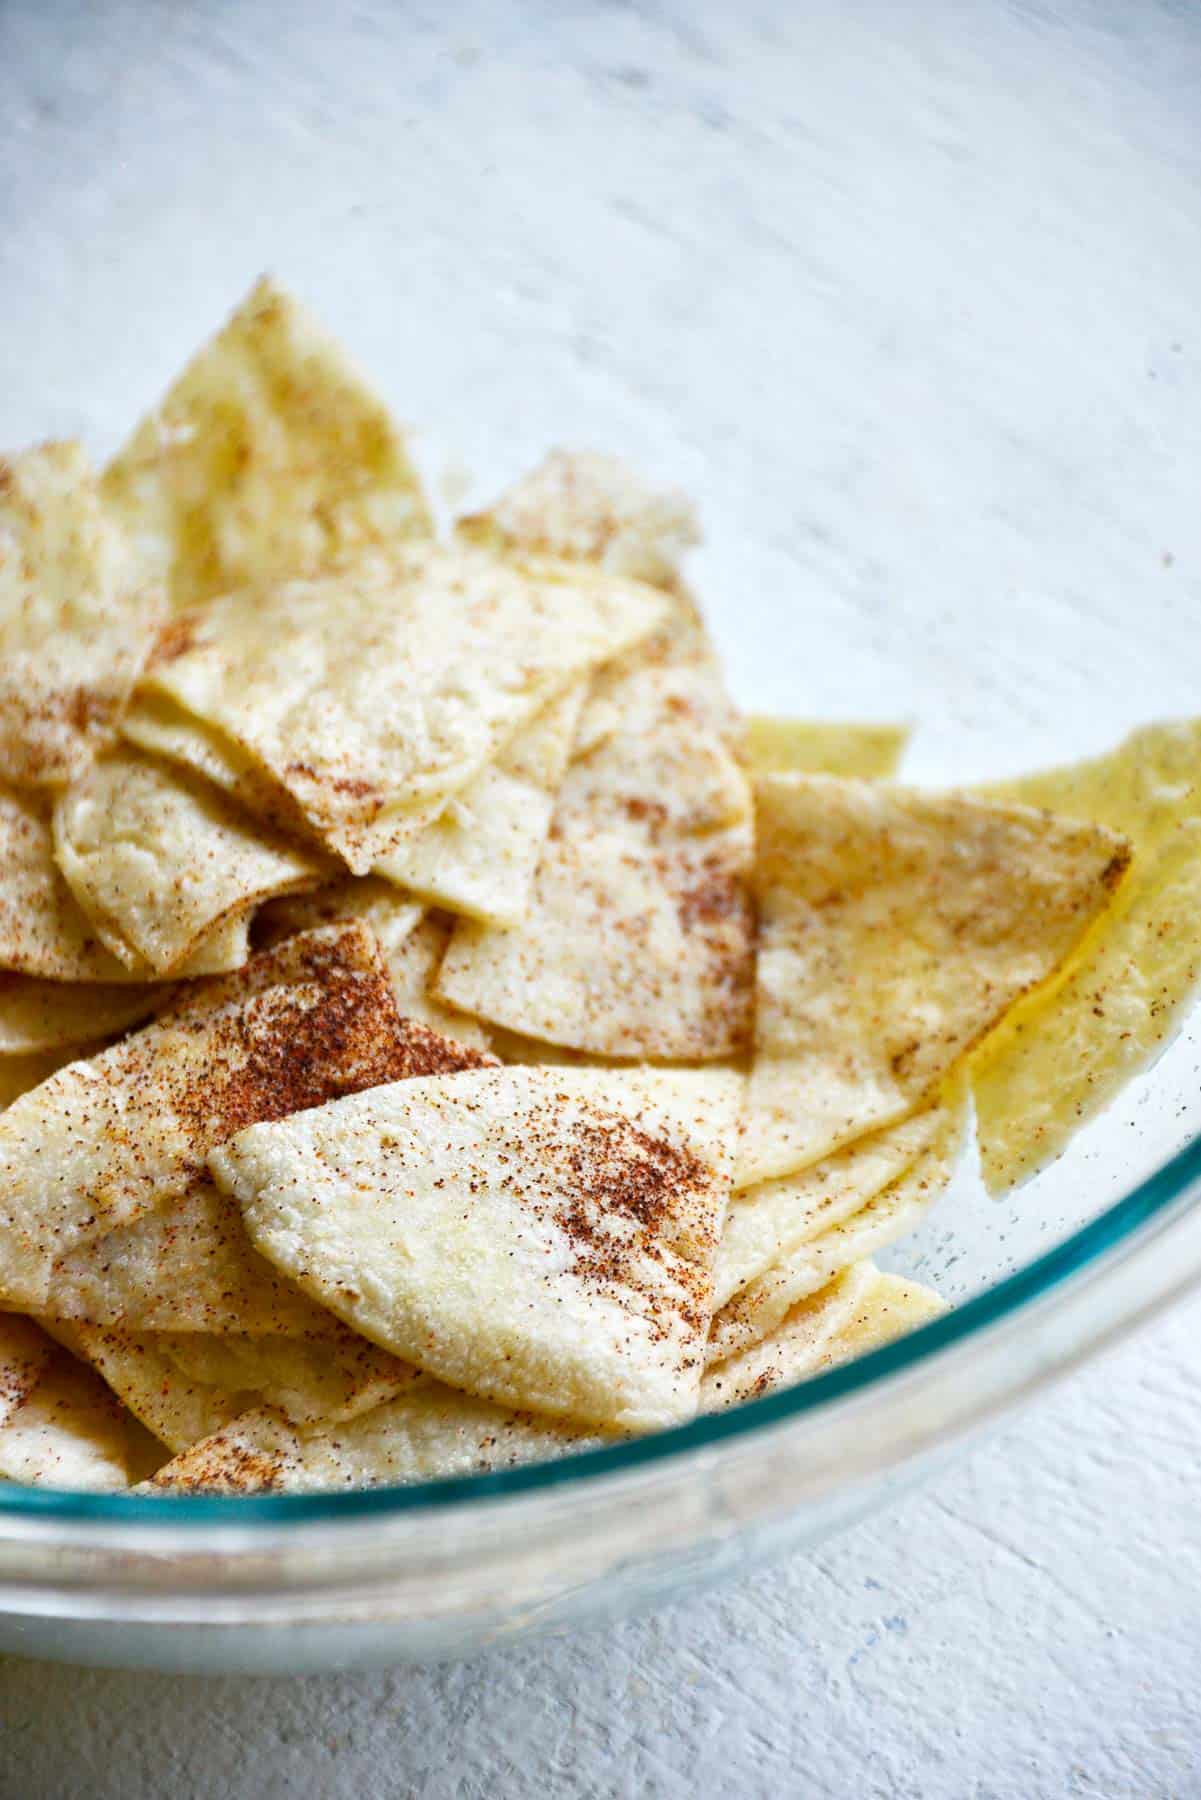 Tortilla wedges tossed with seasonings in a bowl